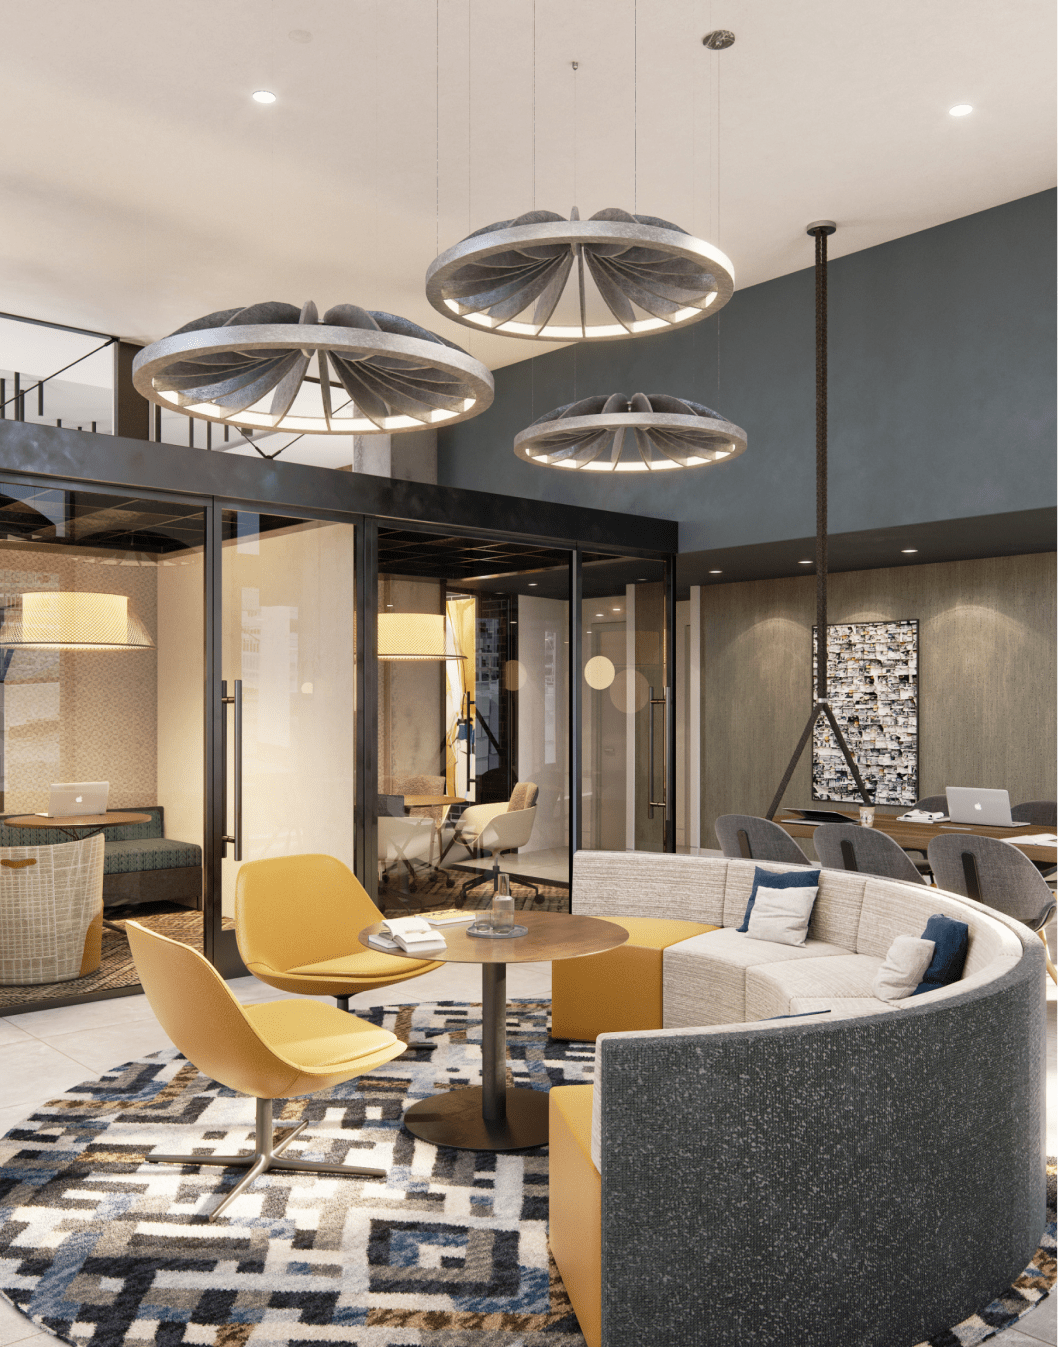 A modern office lobby & coworking space with a circular seating area. One of the top-notch amenities at Elle's DC apartments.